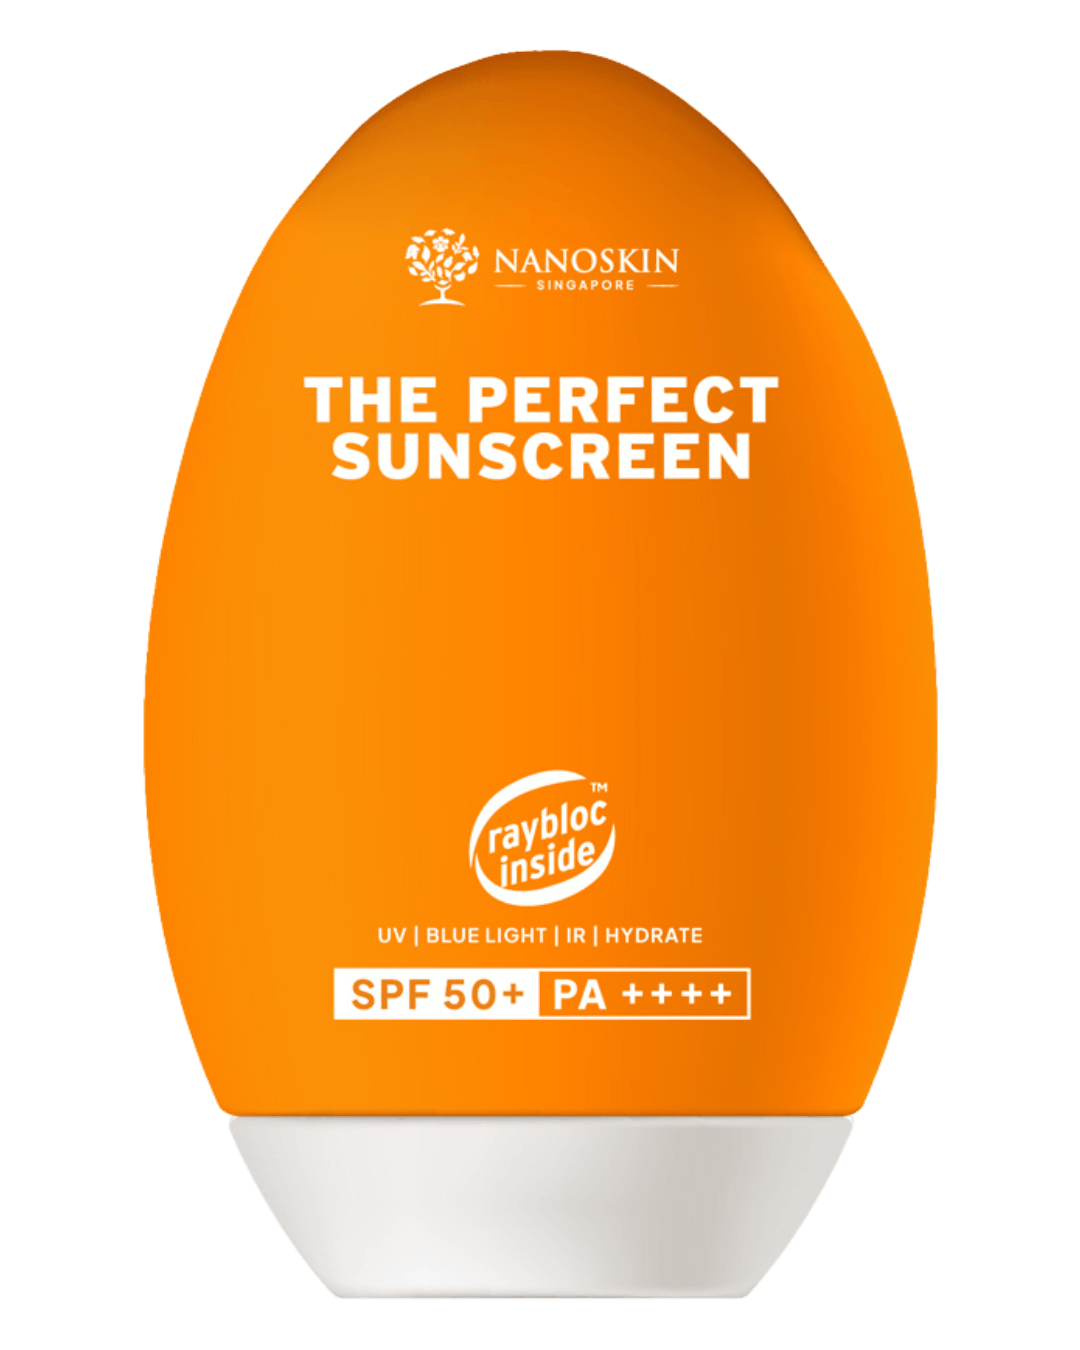 Daily Vanity Beauty Awards 2024 Best Skincare Nano Singapore The Perfect Sunscreen SPF50+ PA++++ Voted By Beauty Experts